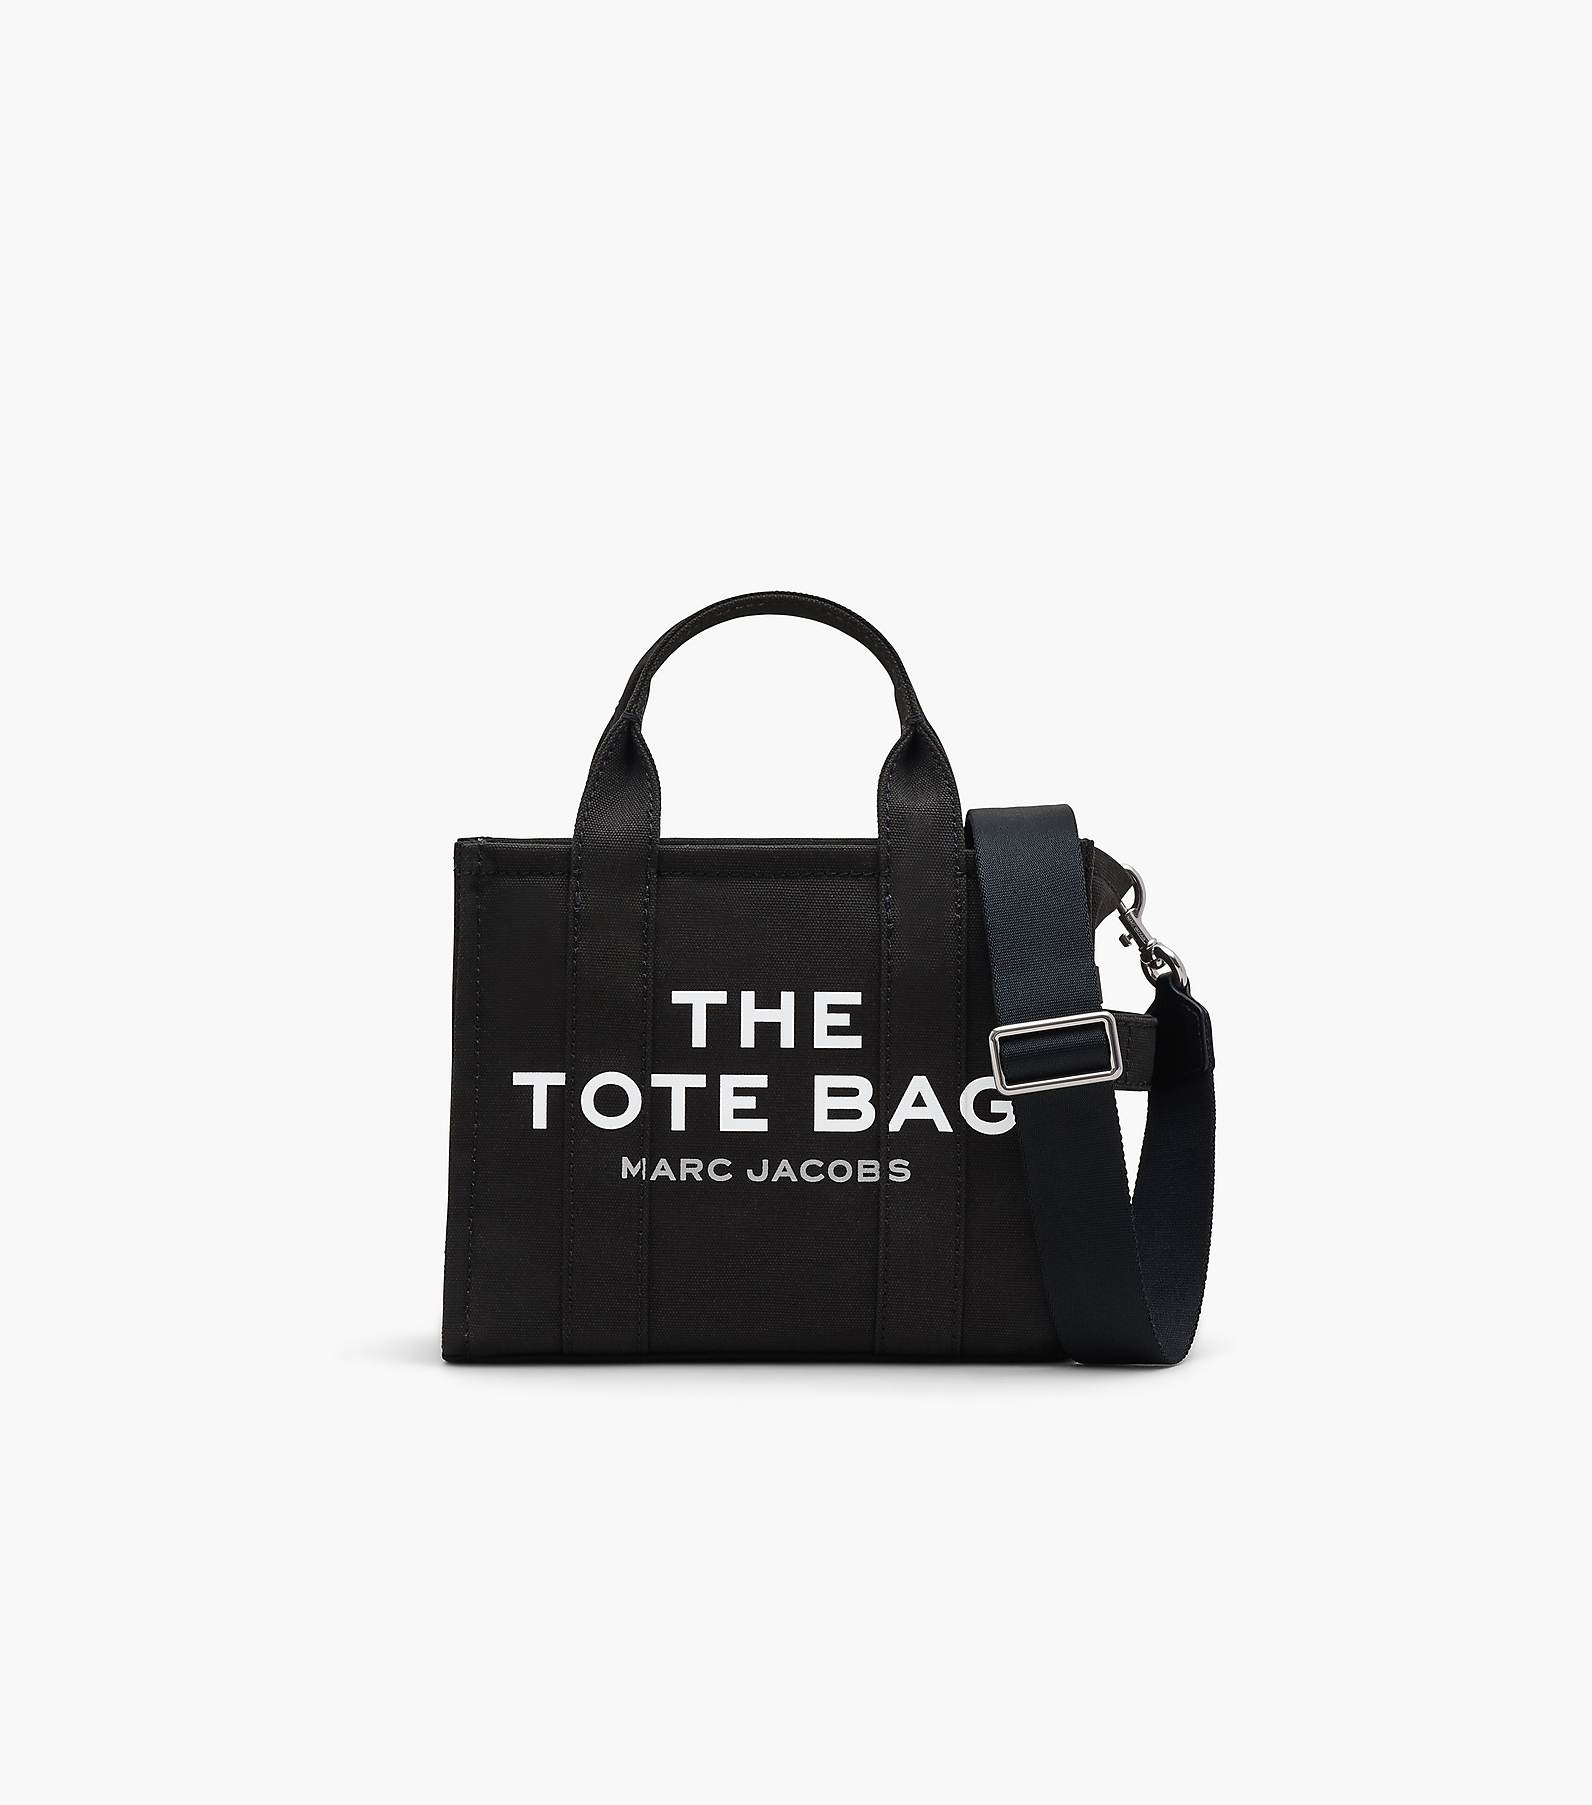 The Canvas Small Tote Bag